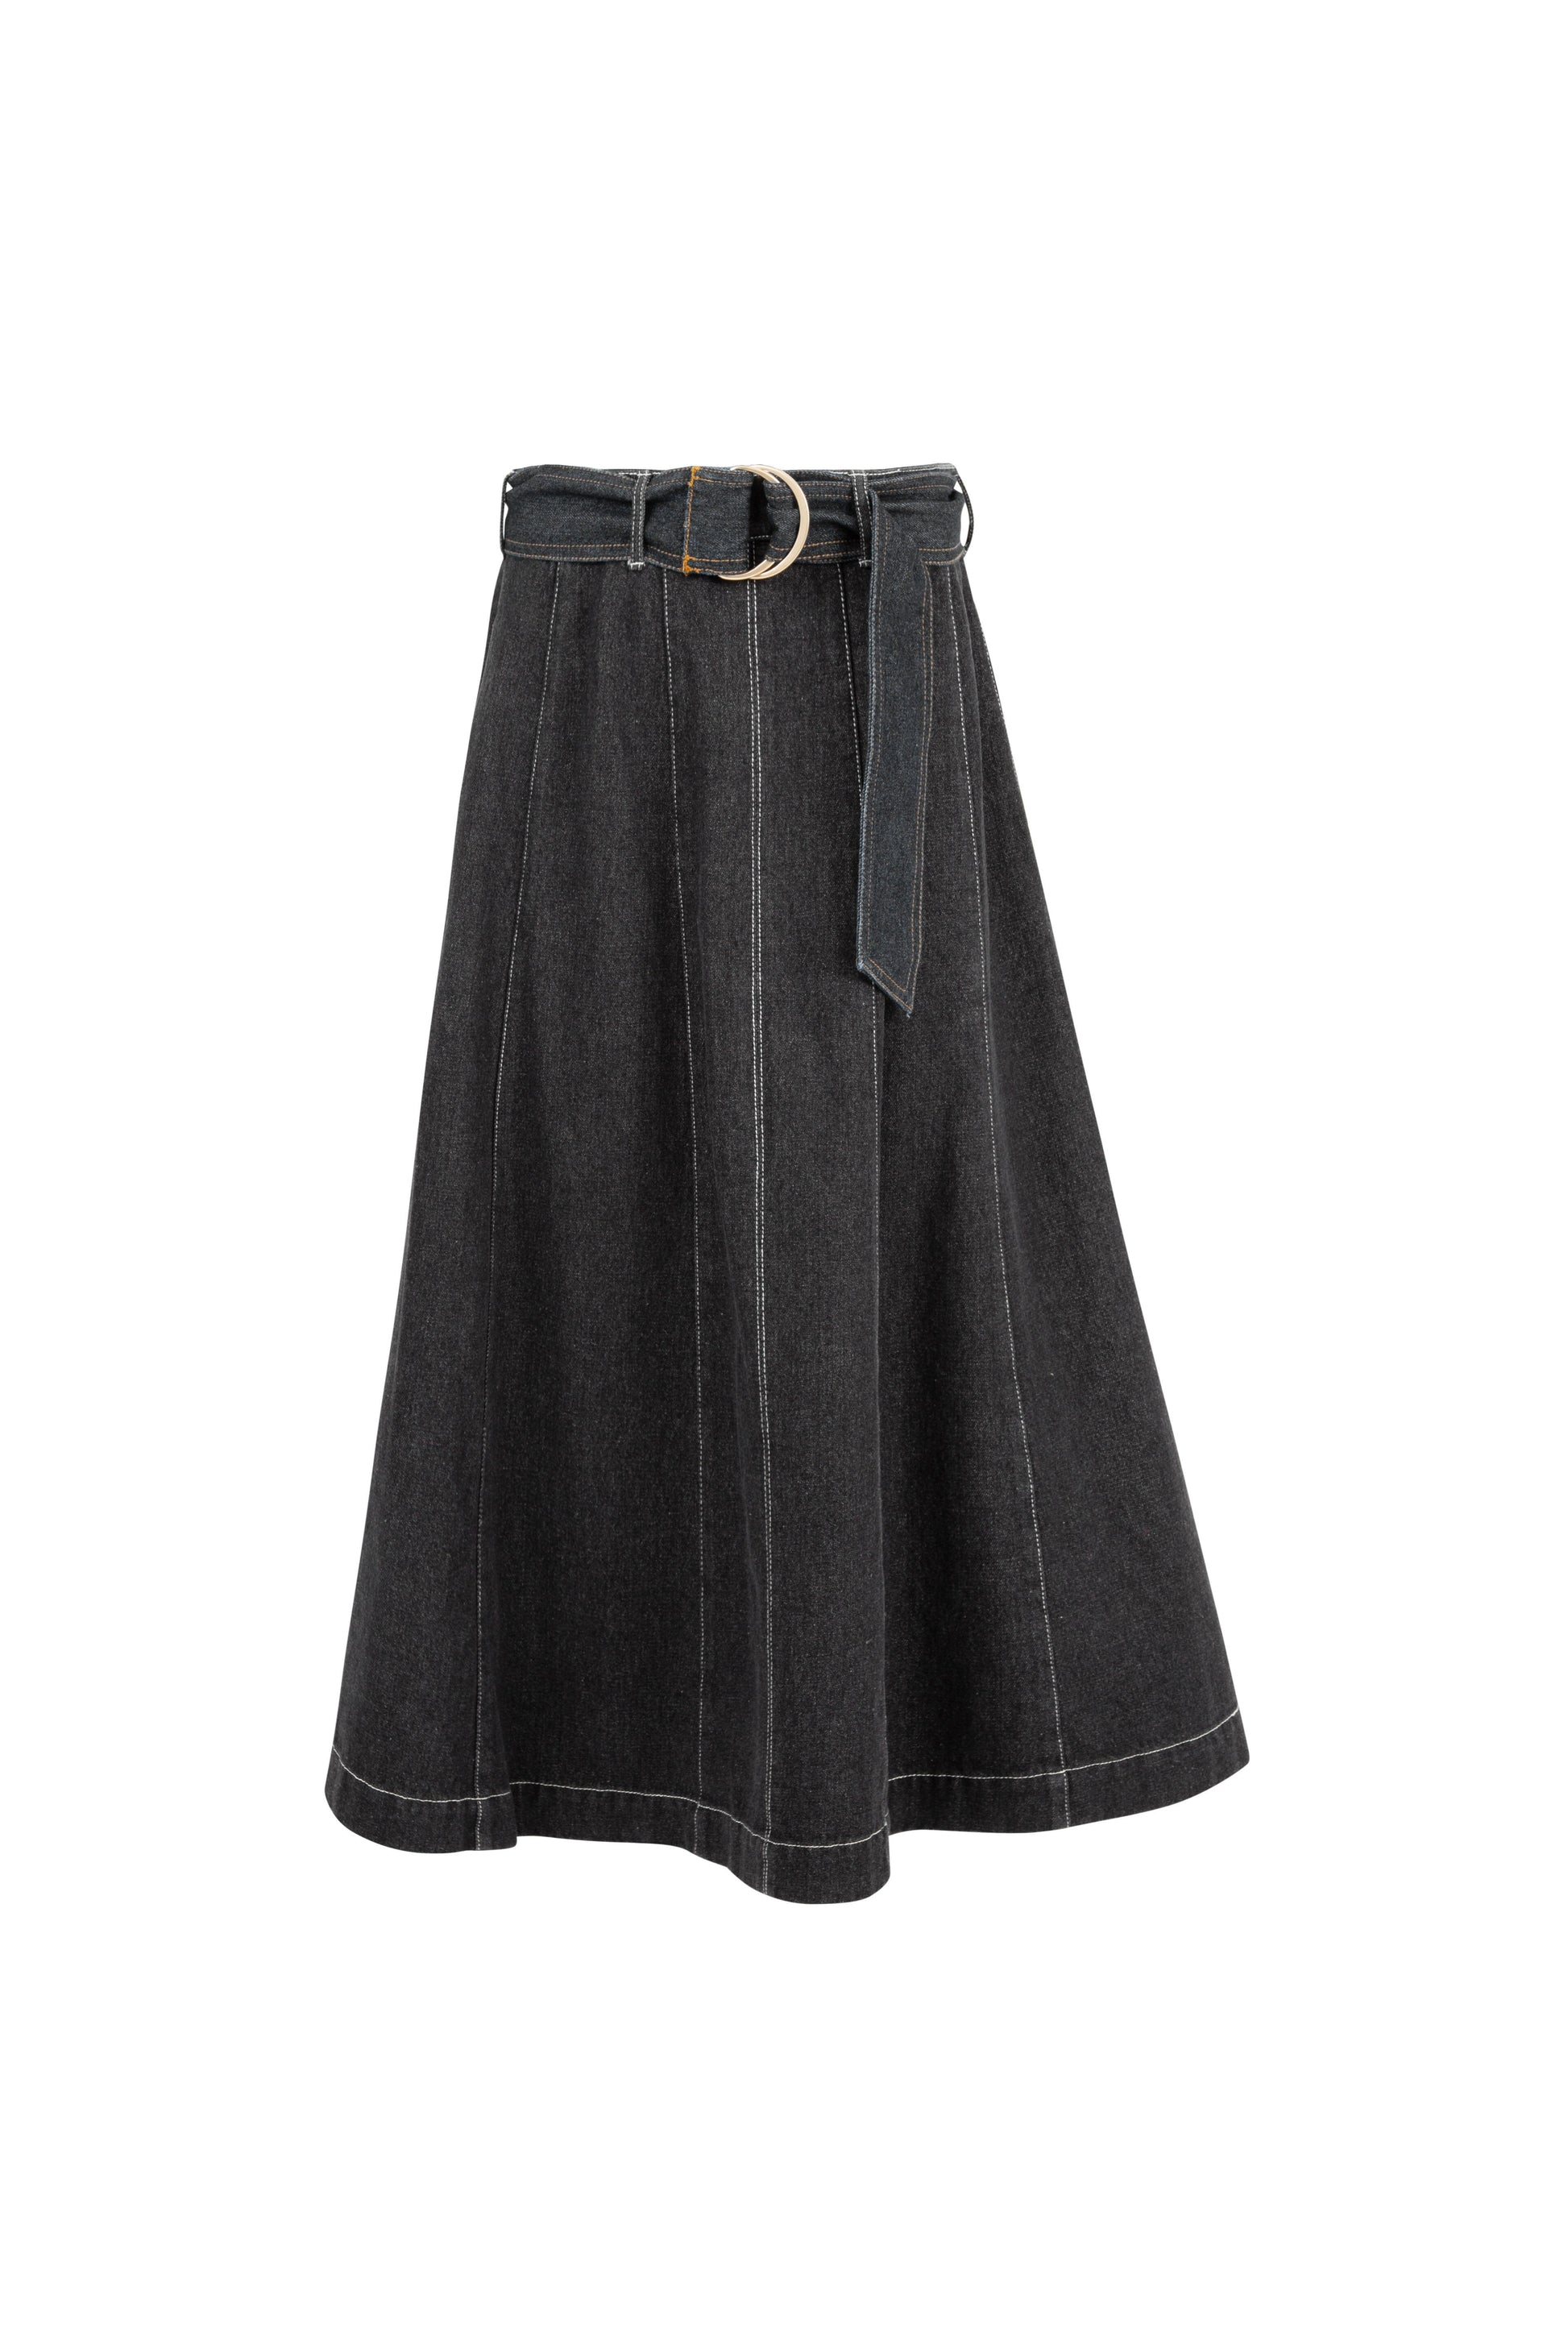 COOPER SAY IT WITH FLARE SKIRT - BLACK - THE VOGUE STORE